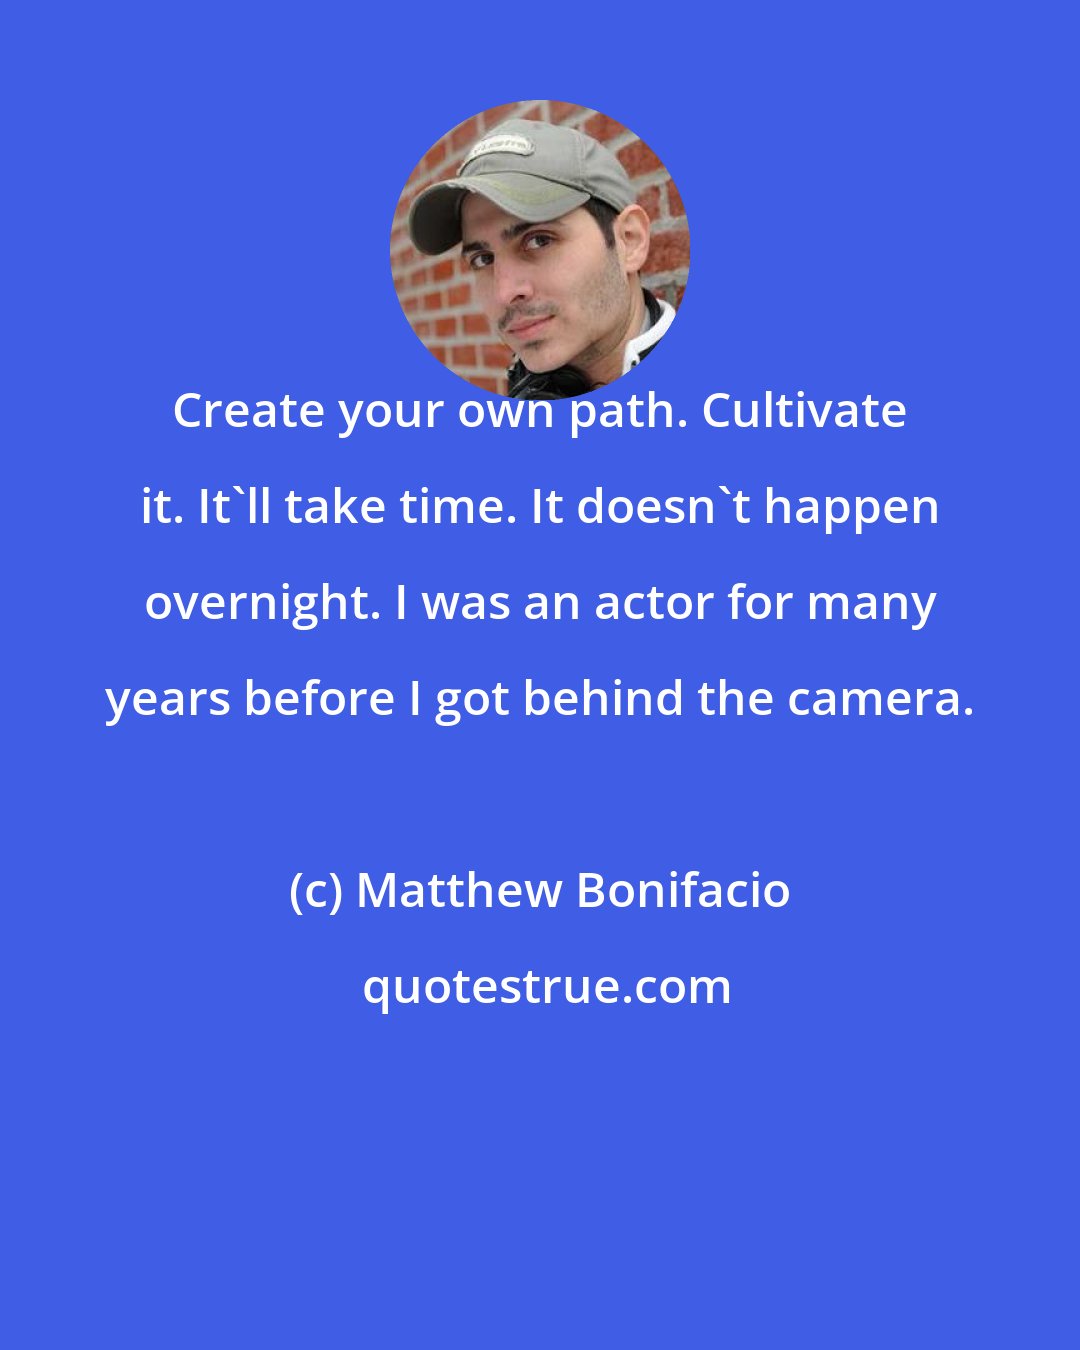 Matthew Bonifacio: Create your own path. Cultivate it. It'll take time. It doesn't happen overnight. I was an actor for many years before I got behind the camera.